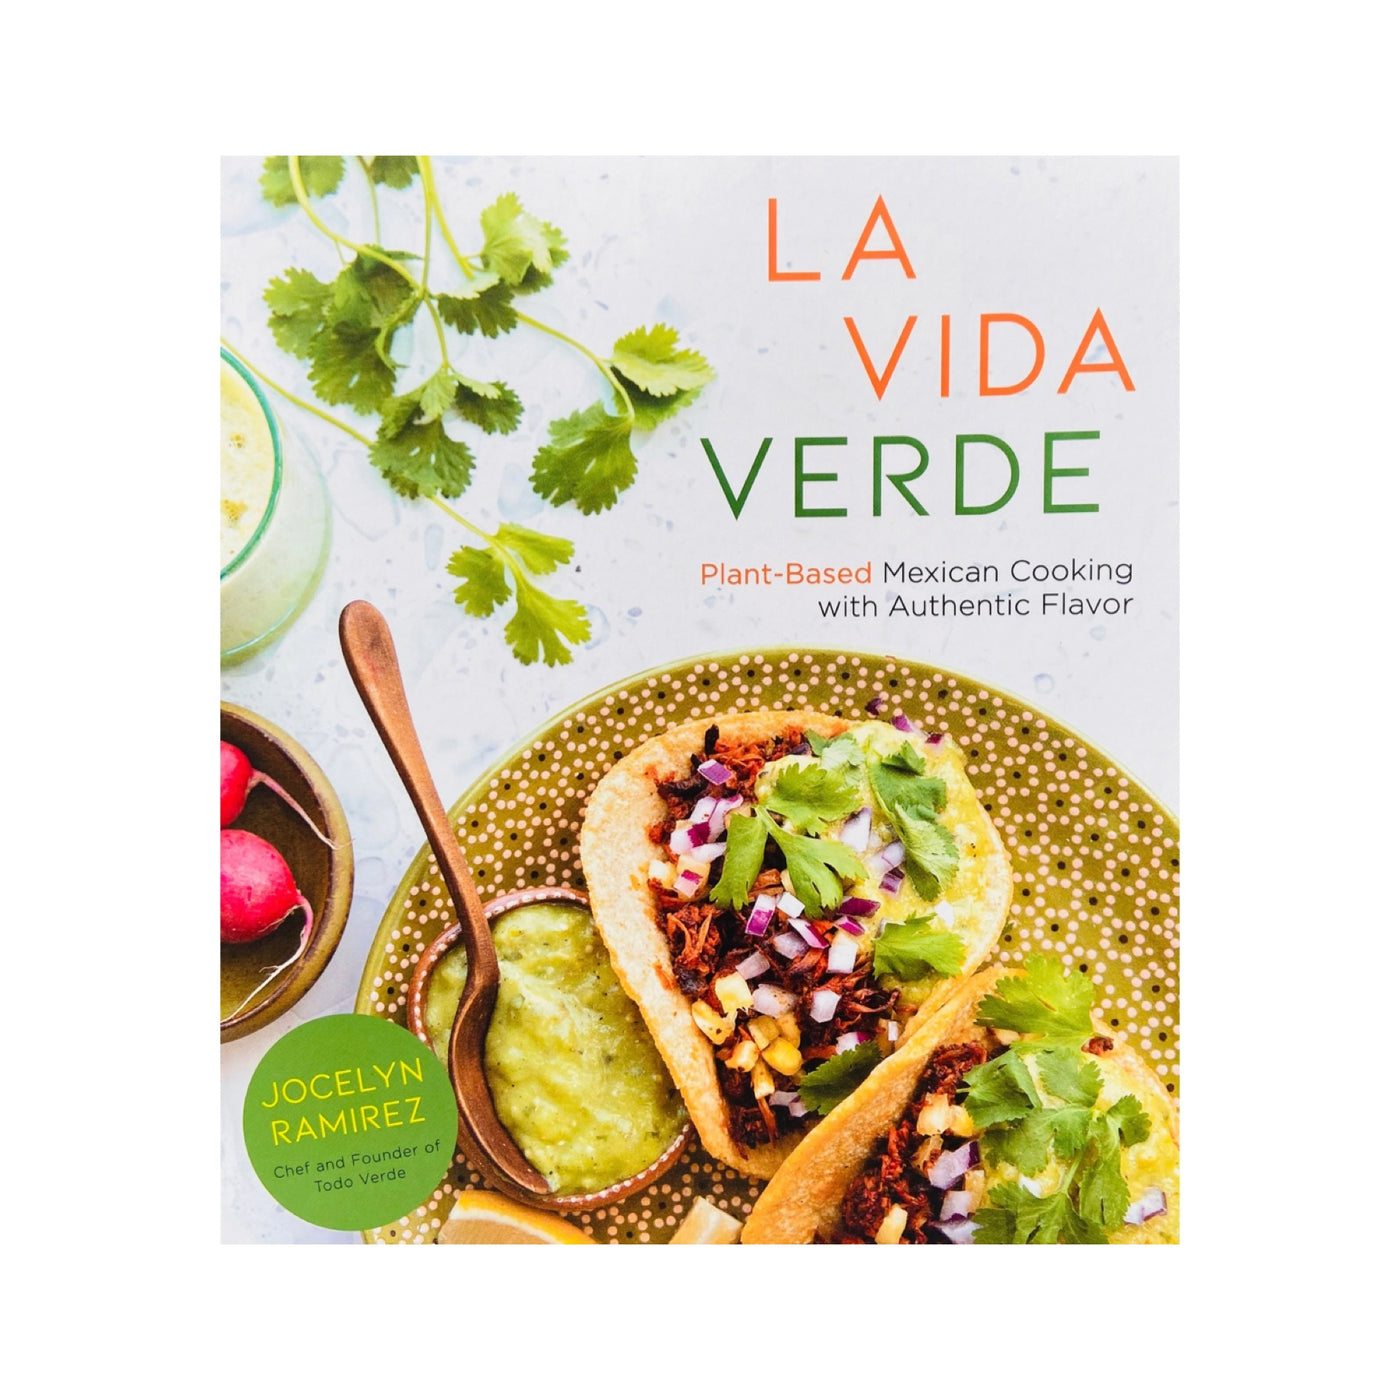 La Vida Verde: Plant-Based Mexican Cooking with Authentic Flavor by Todo Verde cookbook front cover